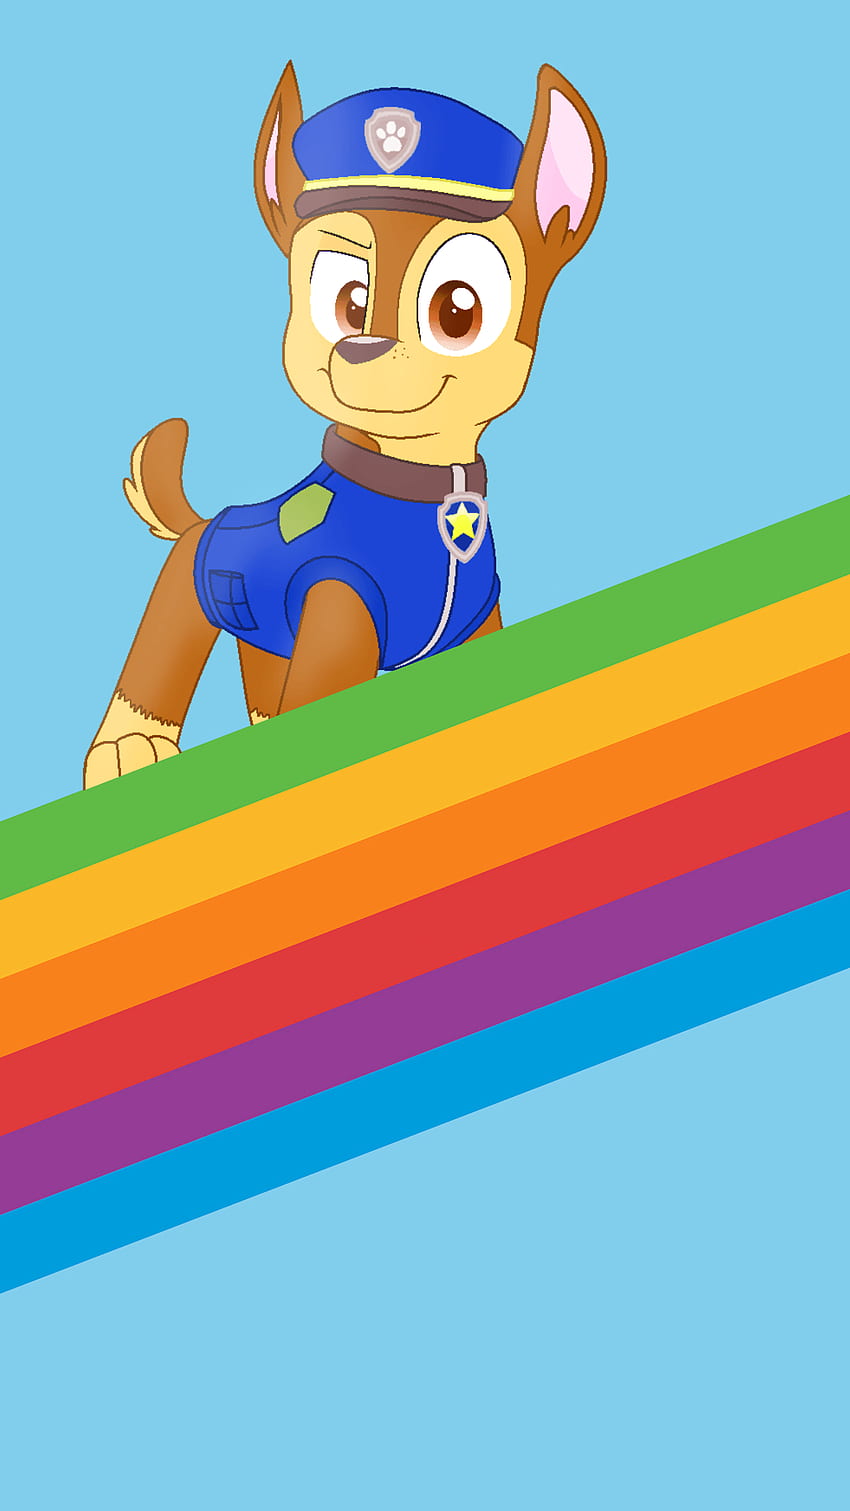 Apple iPhone : Chase Rainbow Stripe in 2020. Paw patrol characters, Chase paw patrol, Cartoon HD phone wallpaper